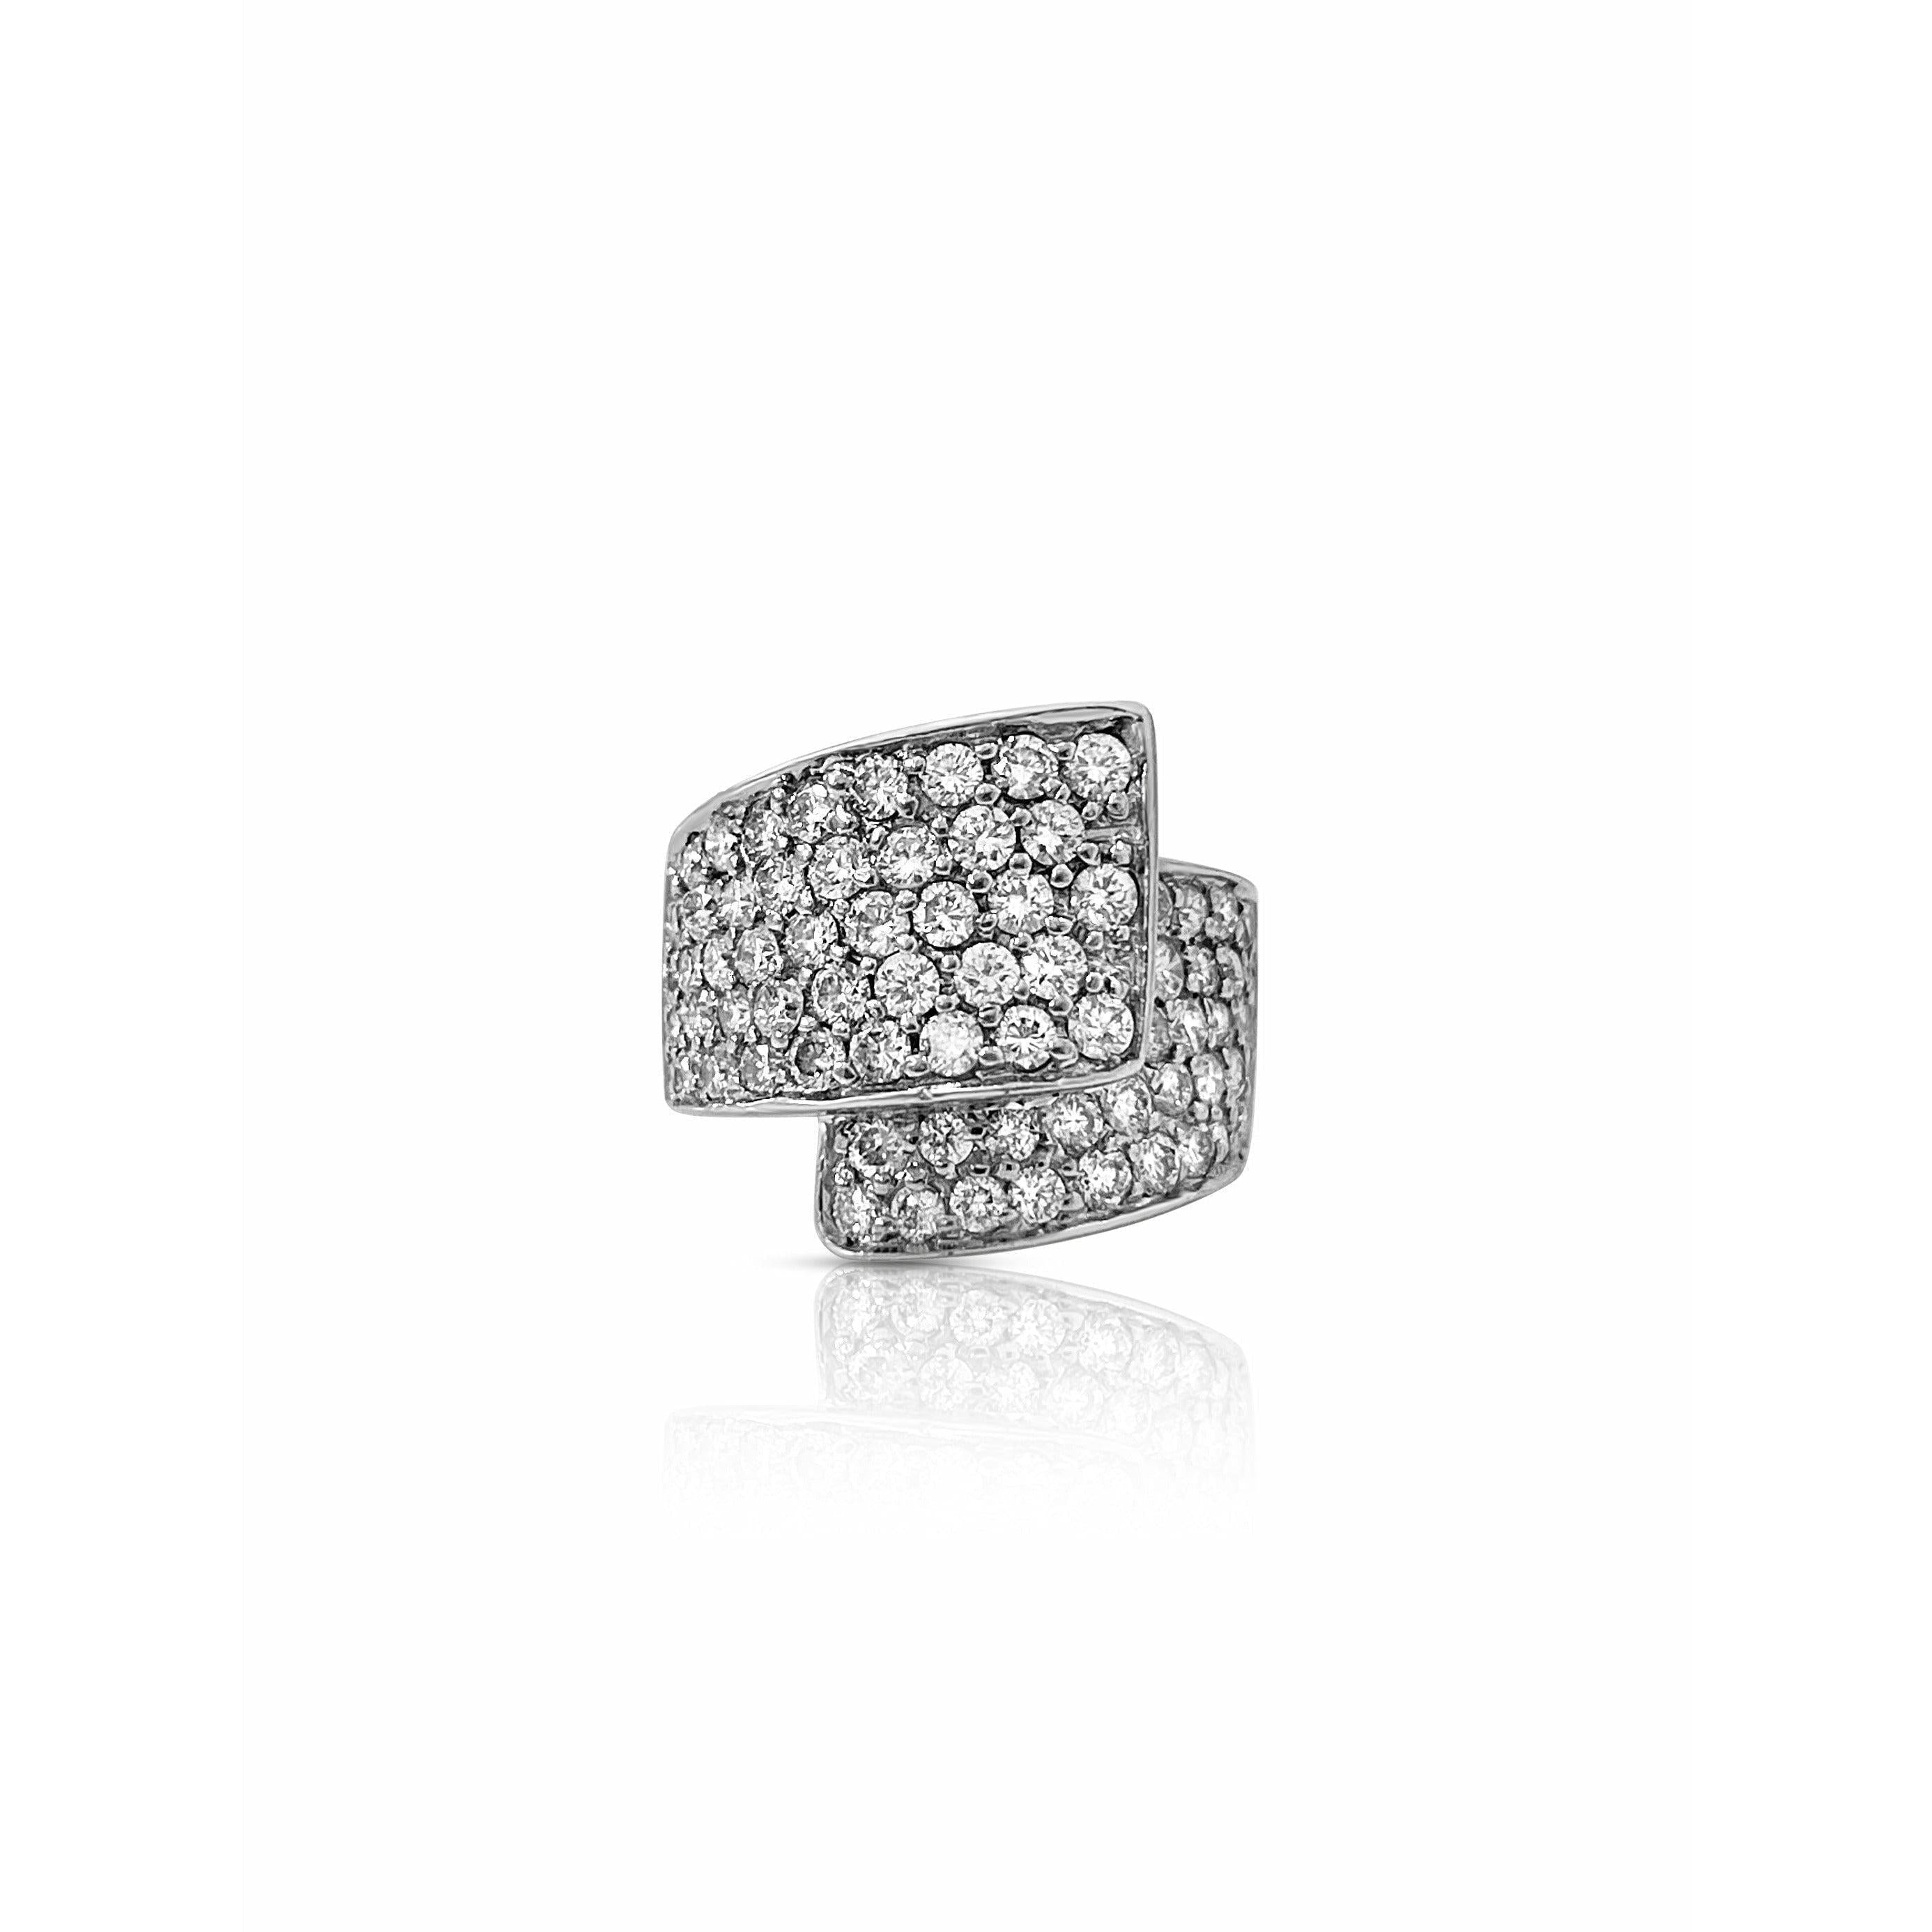 Curved Natural Round Diamond Pave Overlap Ring in 14k White Gold - ASSAY